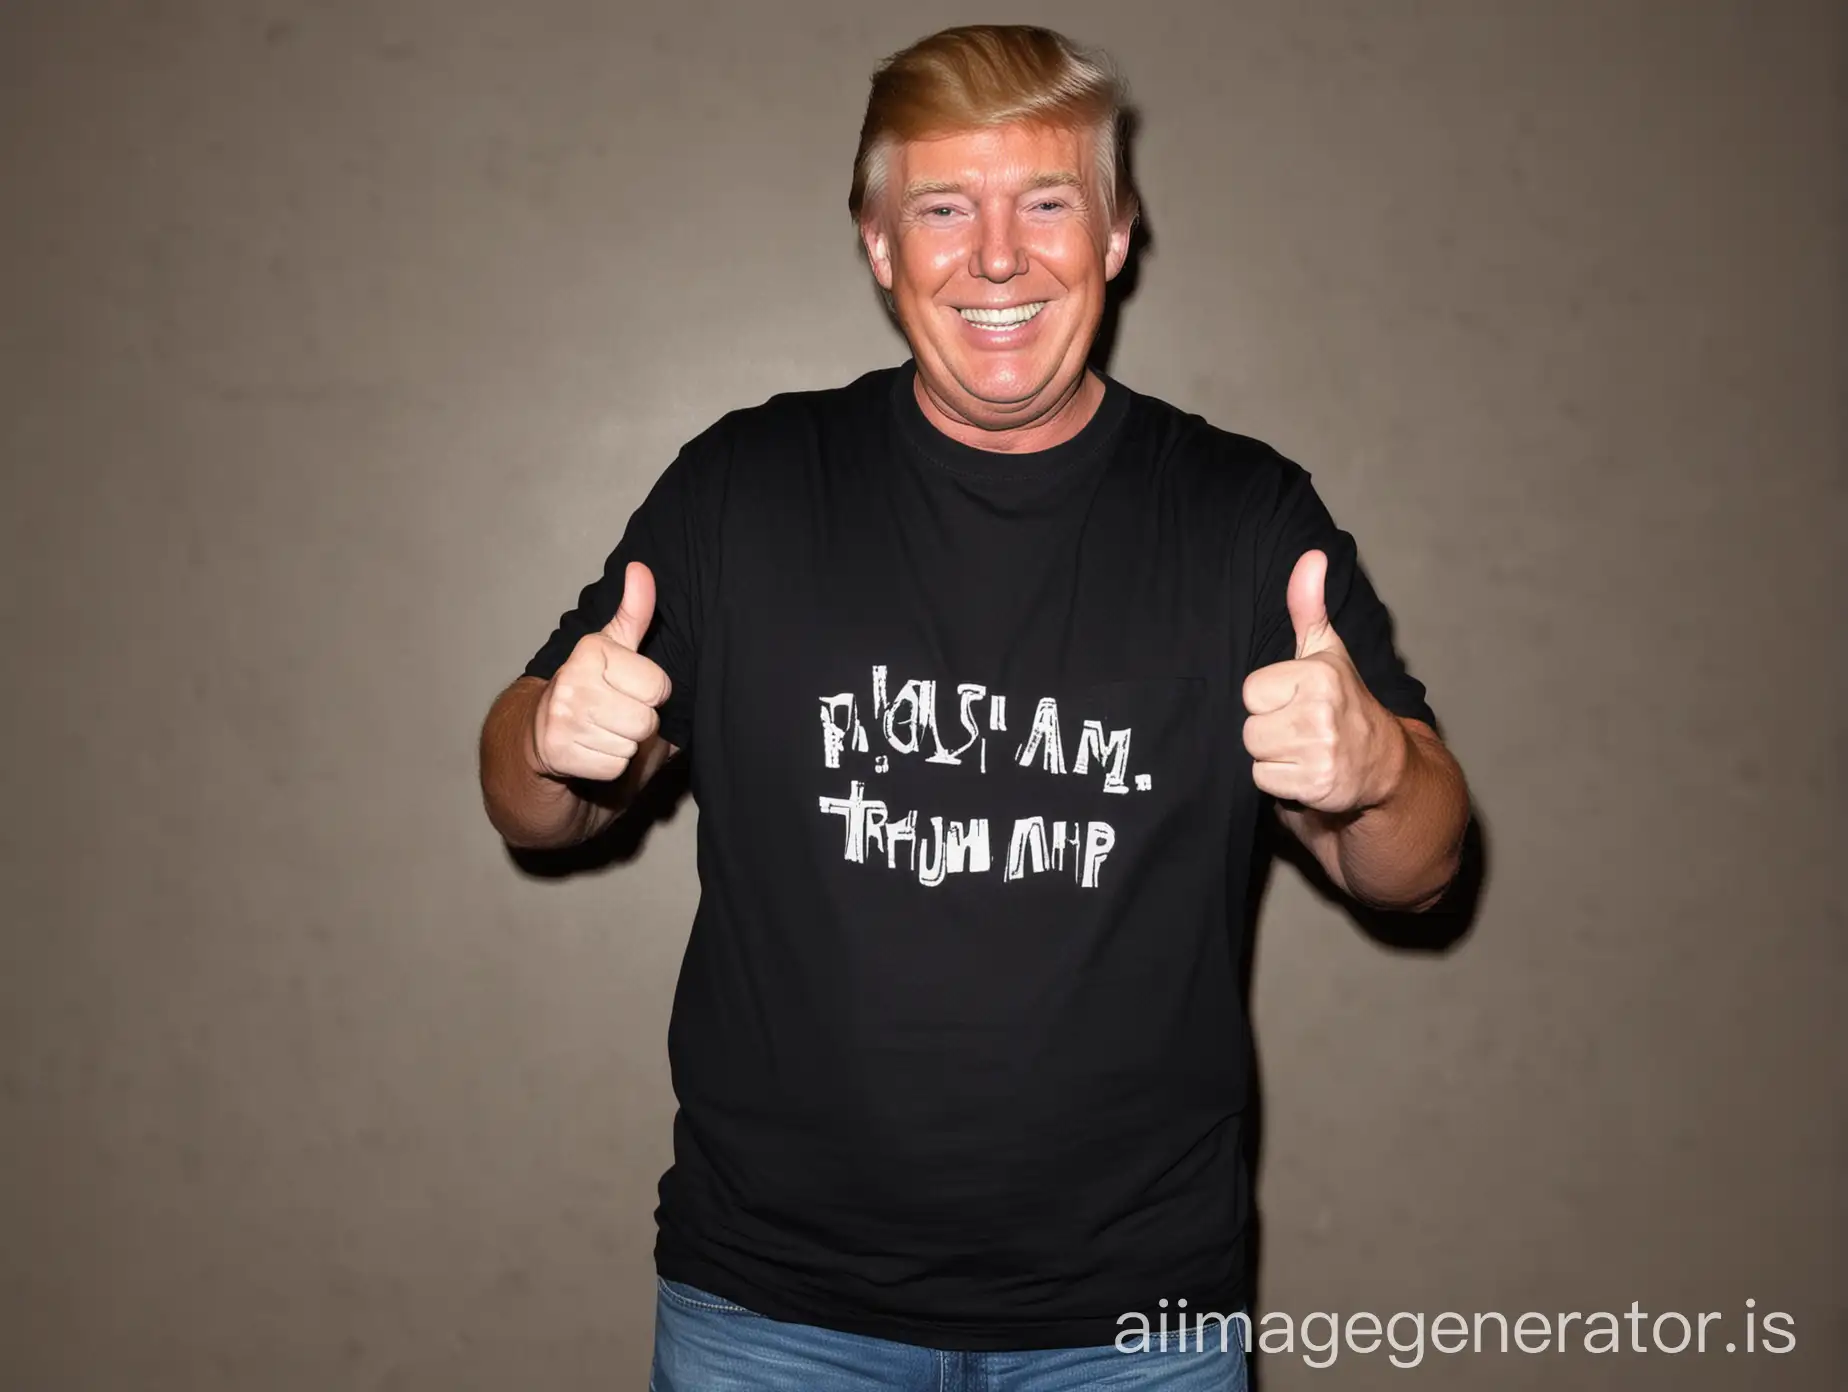 Donald Trump smiling with a black t-shirt standing with thumbs up